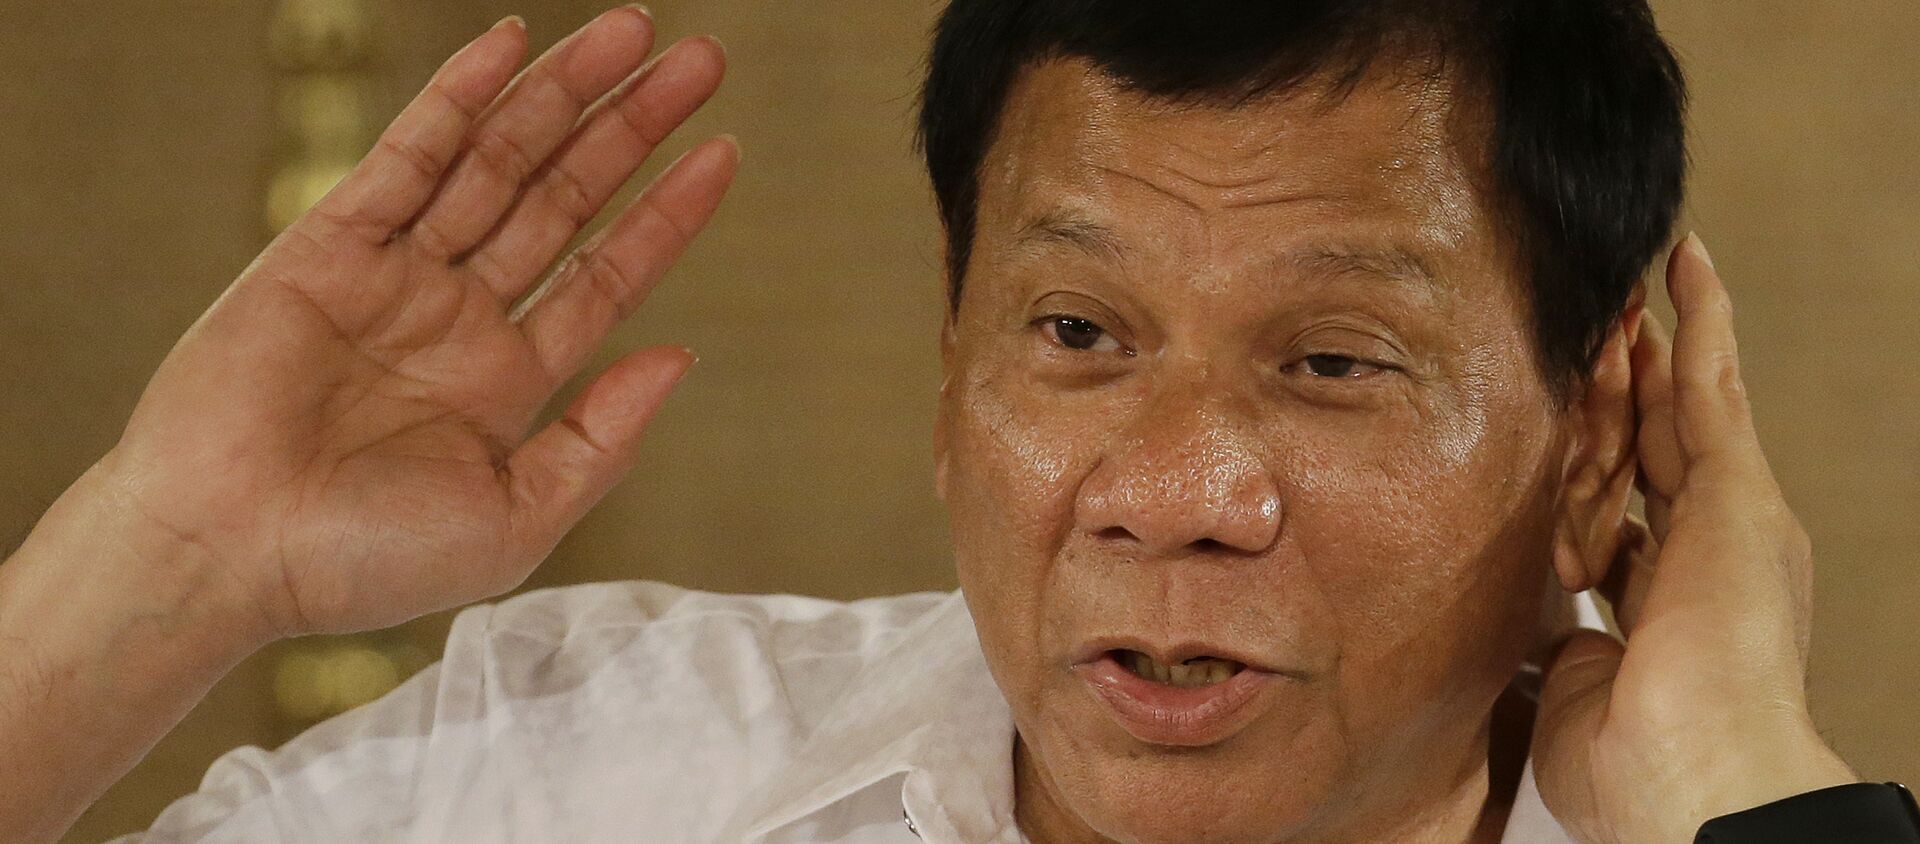 Philippine President Rodrigo Duterte gestures as he answers questions from reporters during a press conference - Sputnik International, 1920, 24.08.2018